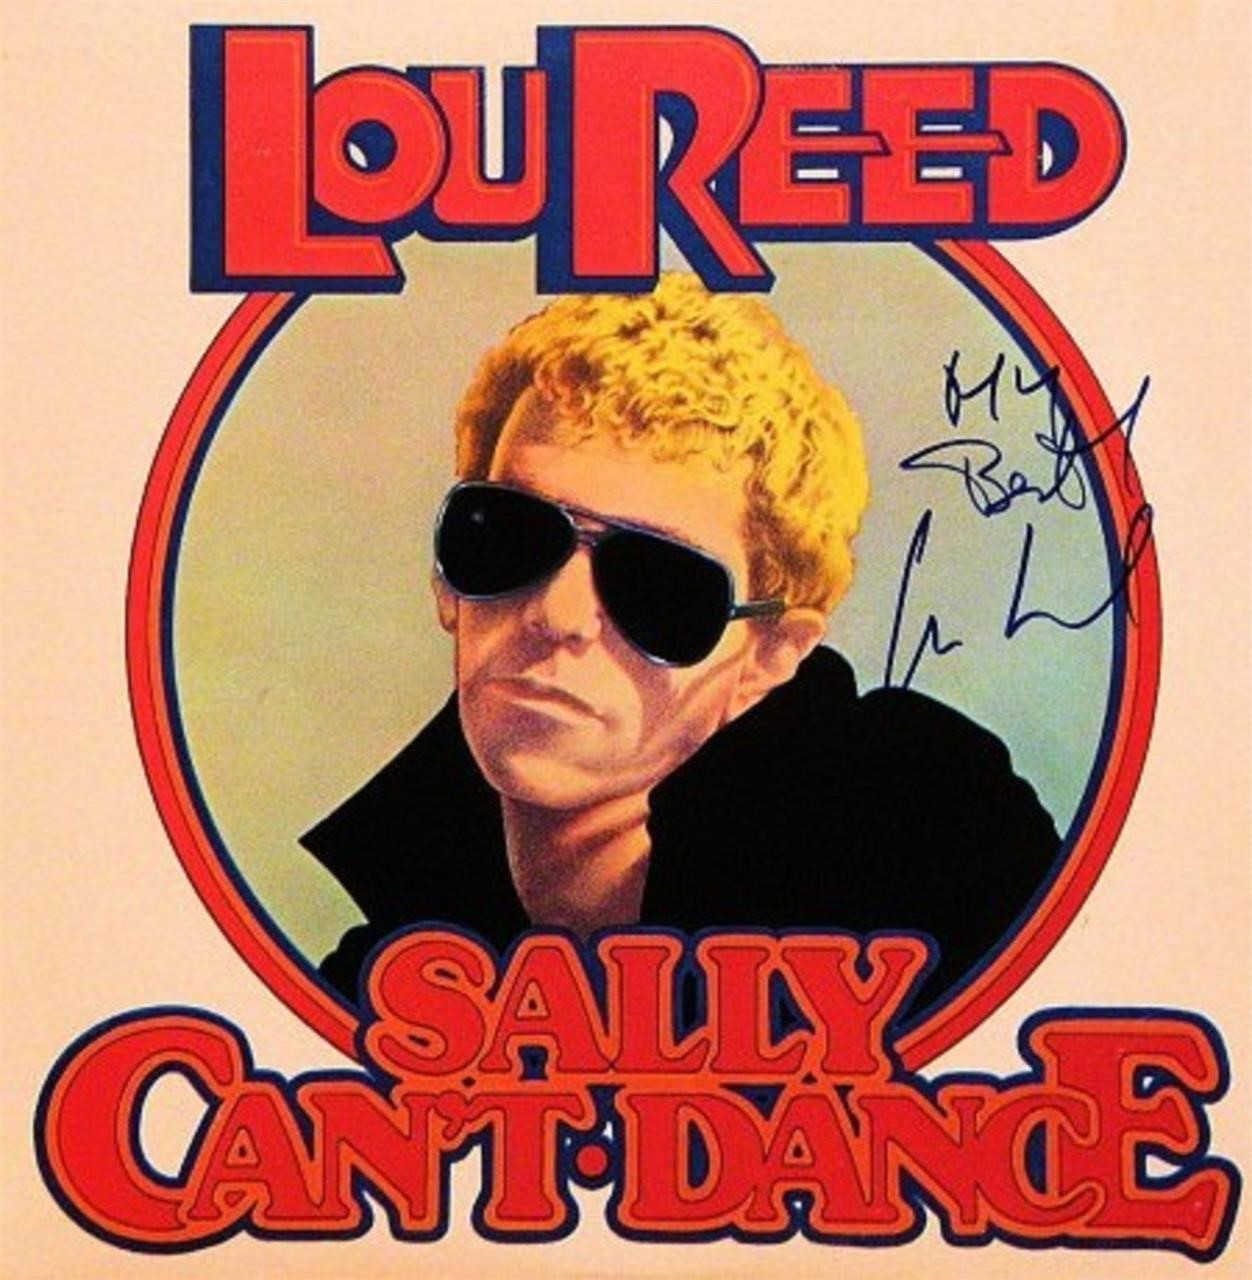 Lou Reed signed "Sally Can't Dance" album